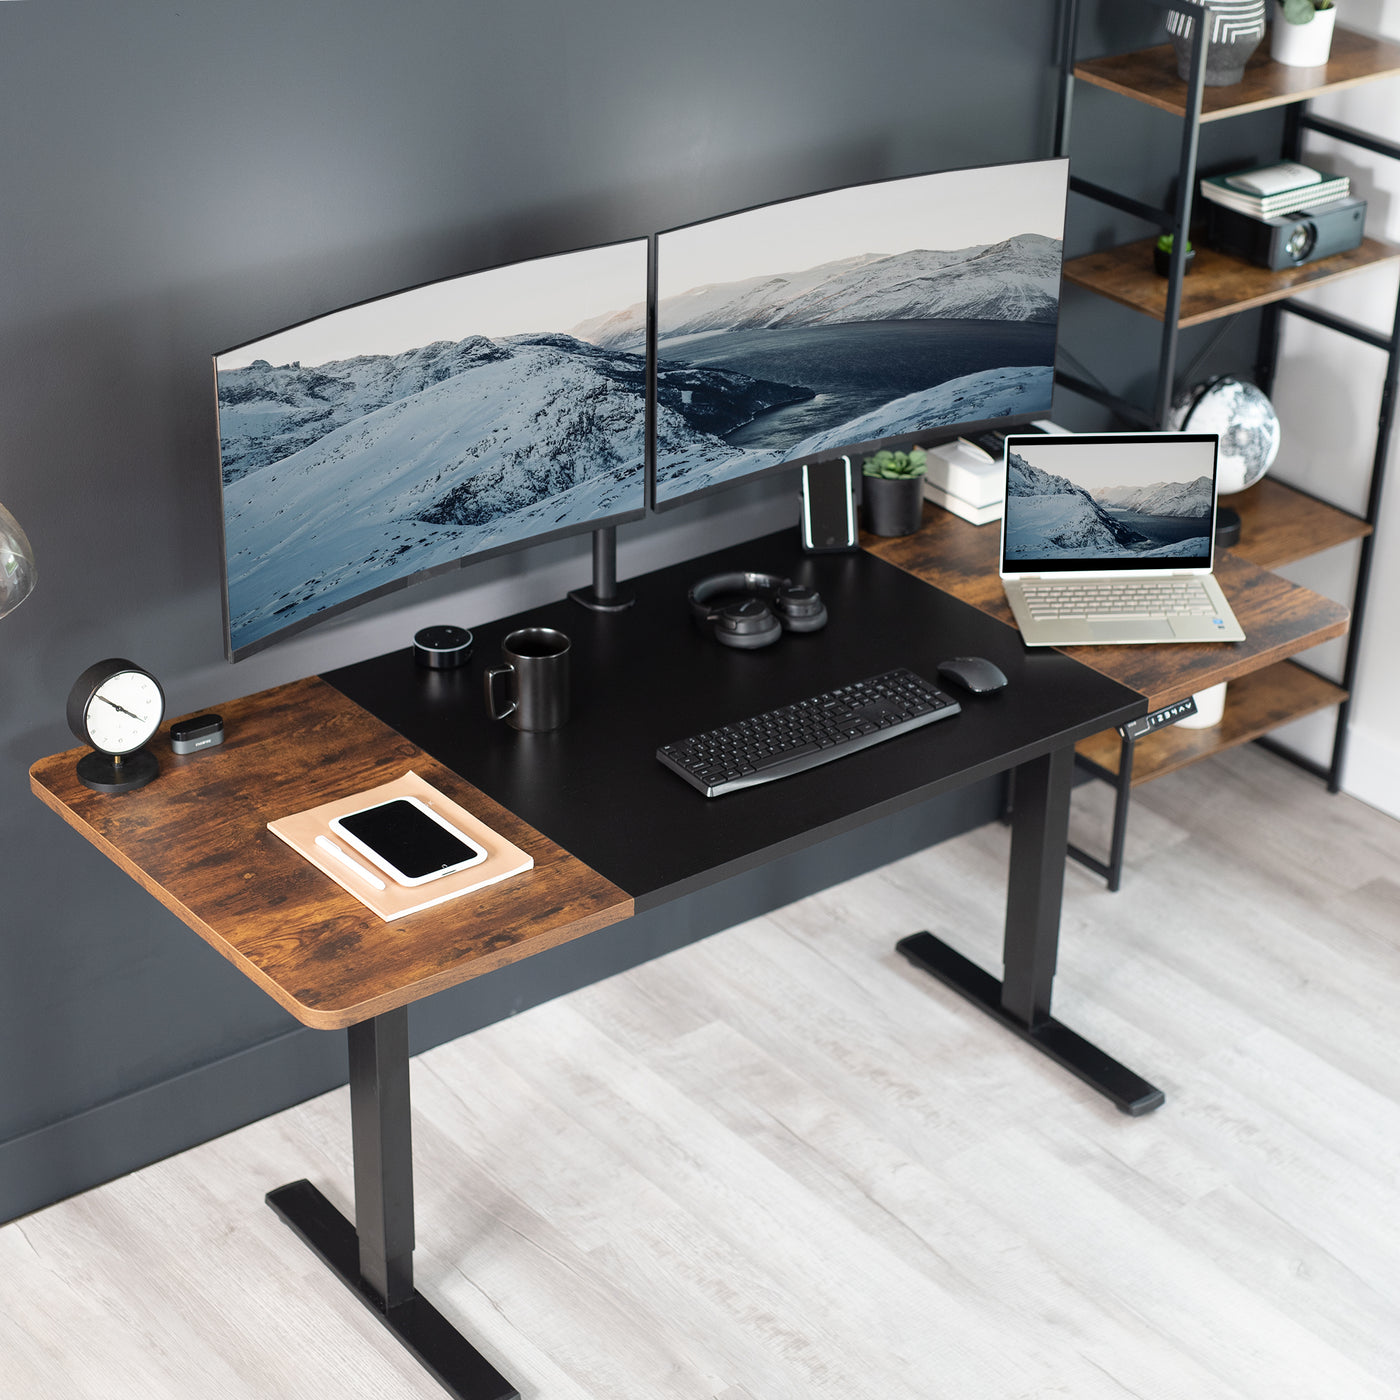 Durable sit to stand desk rustic tabletop workstation with wide surface space.